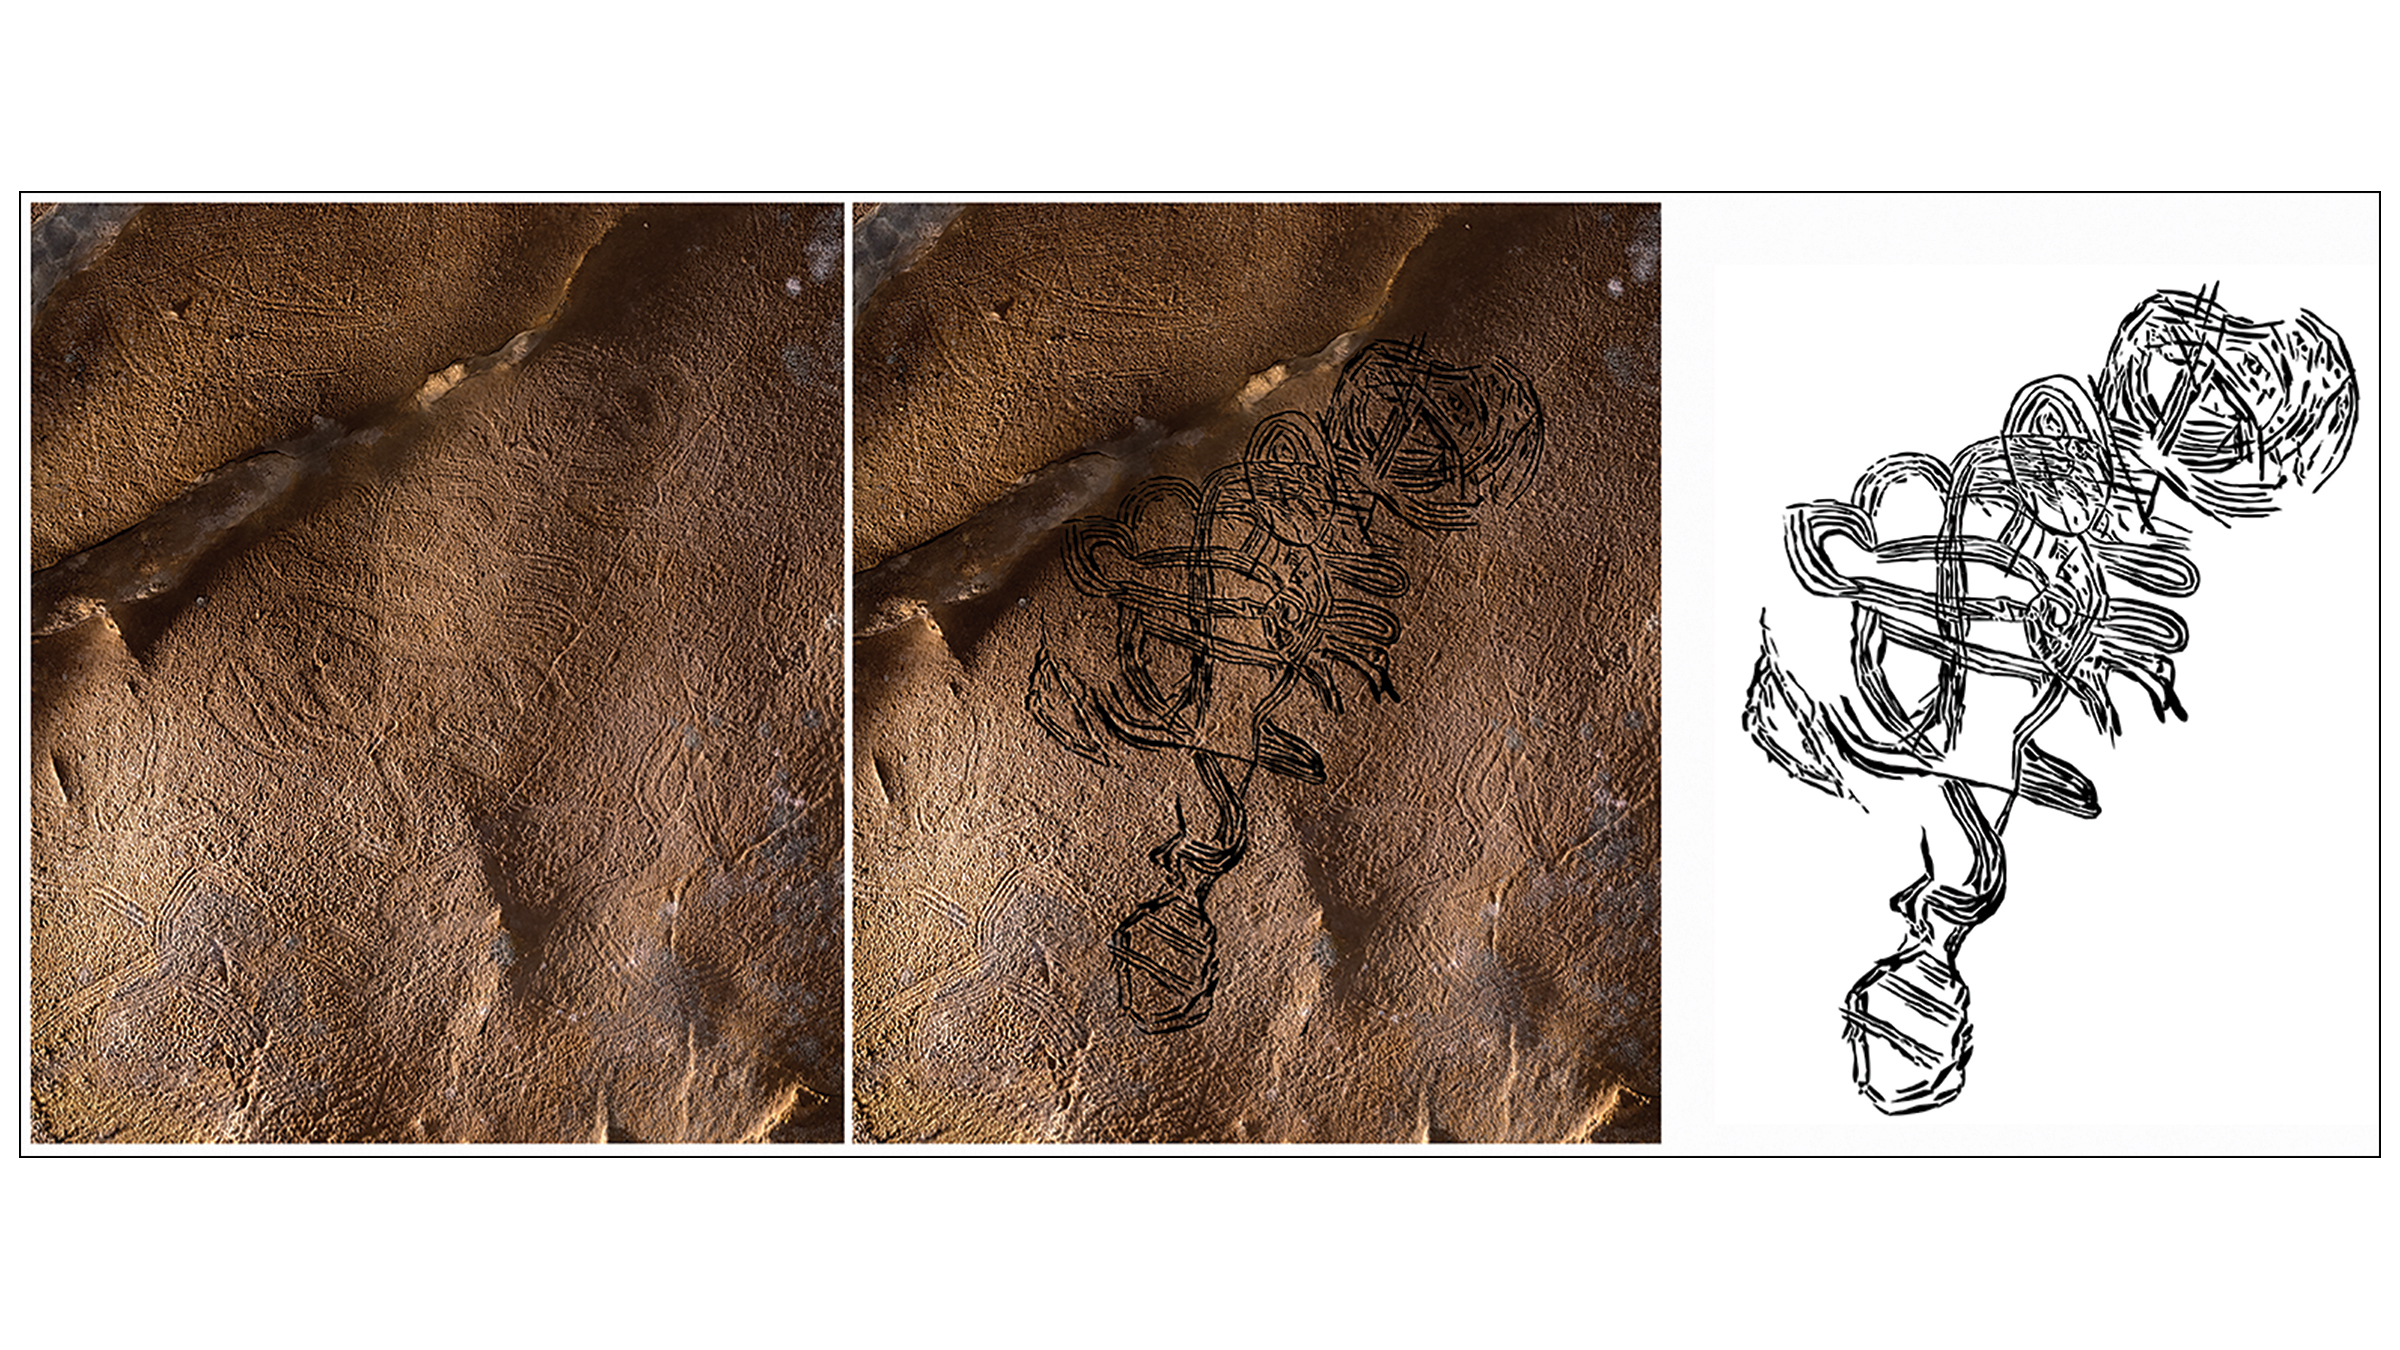 An enigmatic figure of swirling lines and a possible rattlesnake tail in the nineteenth unnamed cave in Alabama.